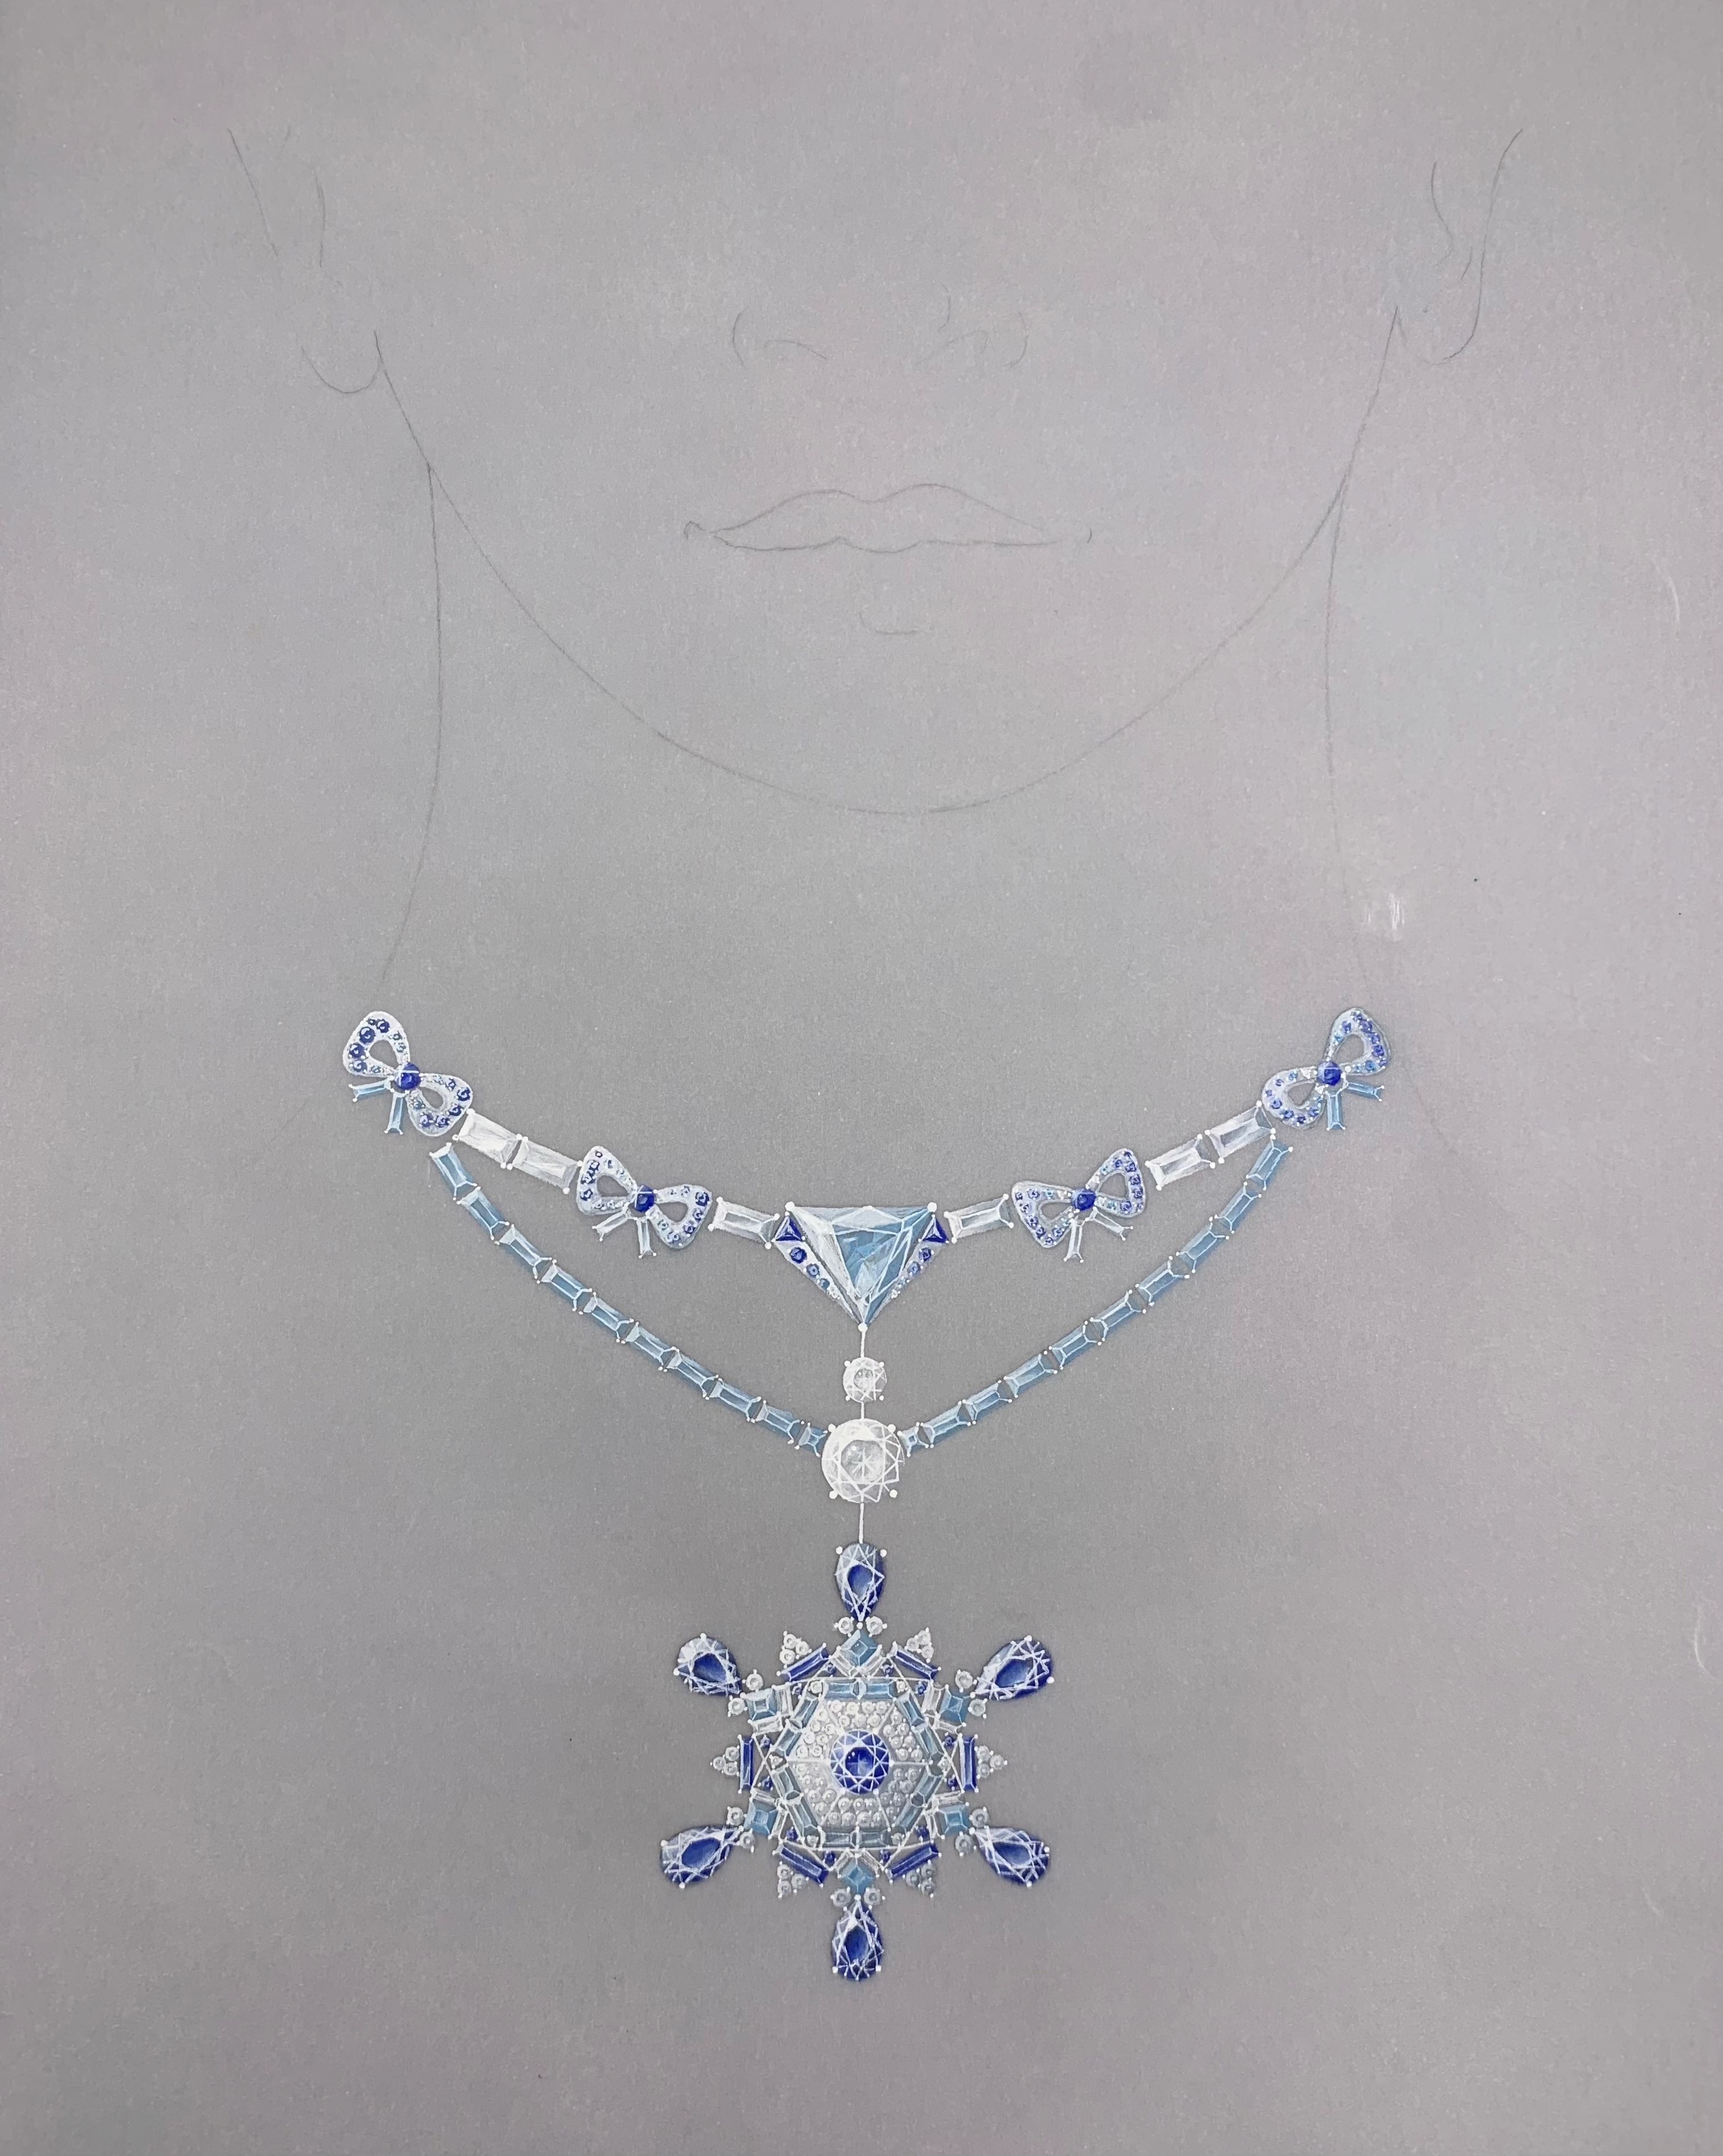 Custom design necklace in a series designed for Anne Hatherway. Using more than 200 gemstones (diamond, sapphire and aquamarine) of different sizes and cuts